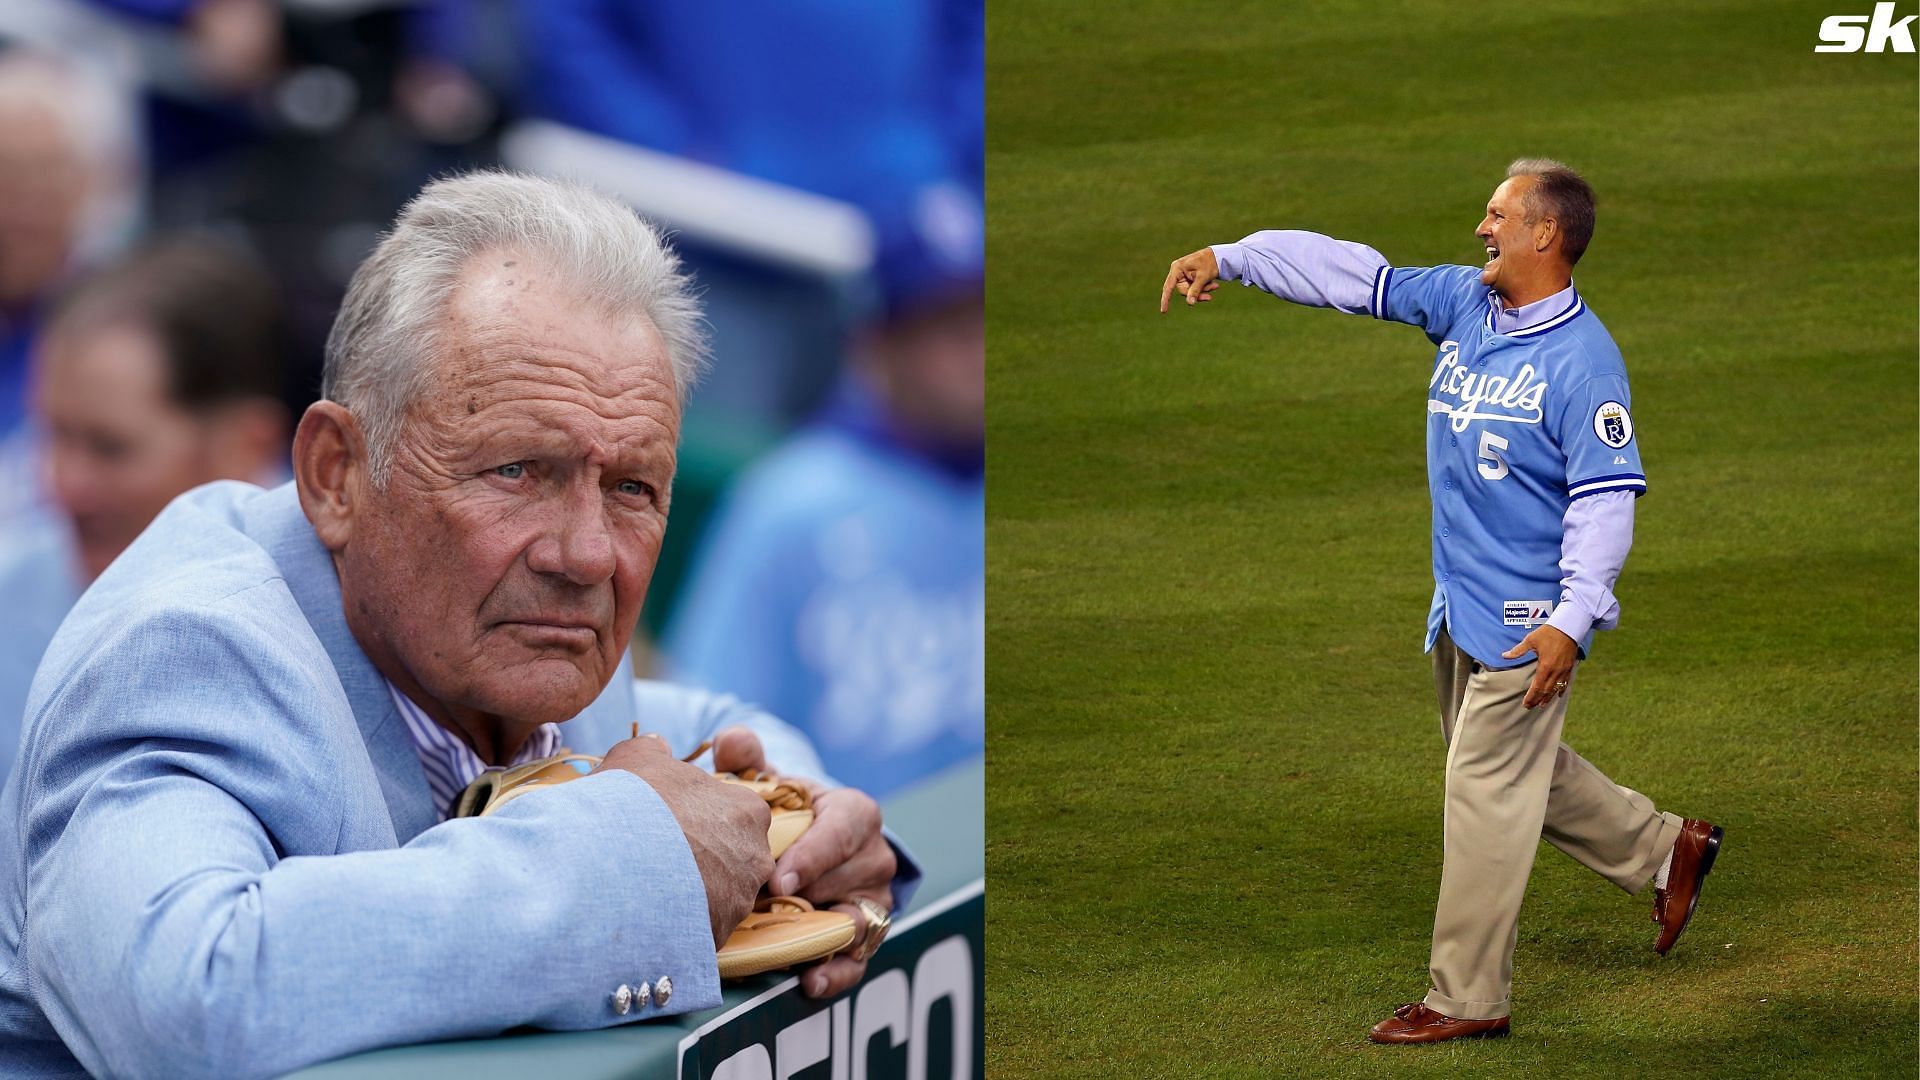 Former Kansas City Royals third baseman and MLB Hall of Famer George Brett watches watches pre-game introduction prior to a game between the Cleveland Guardians and Kansas City Royals on Opening Day 2023